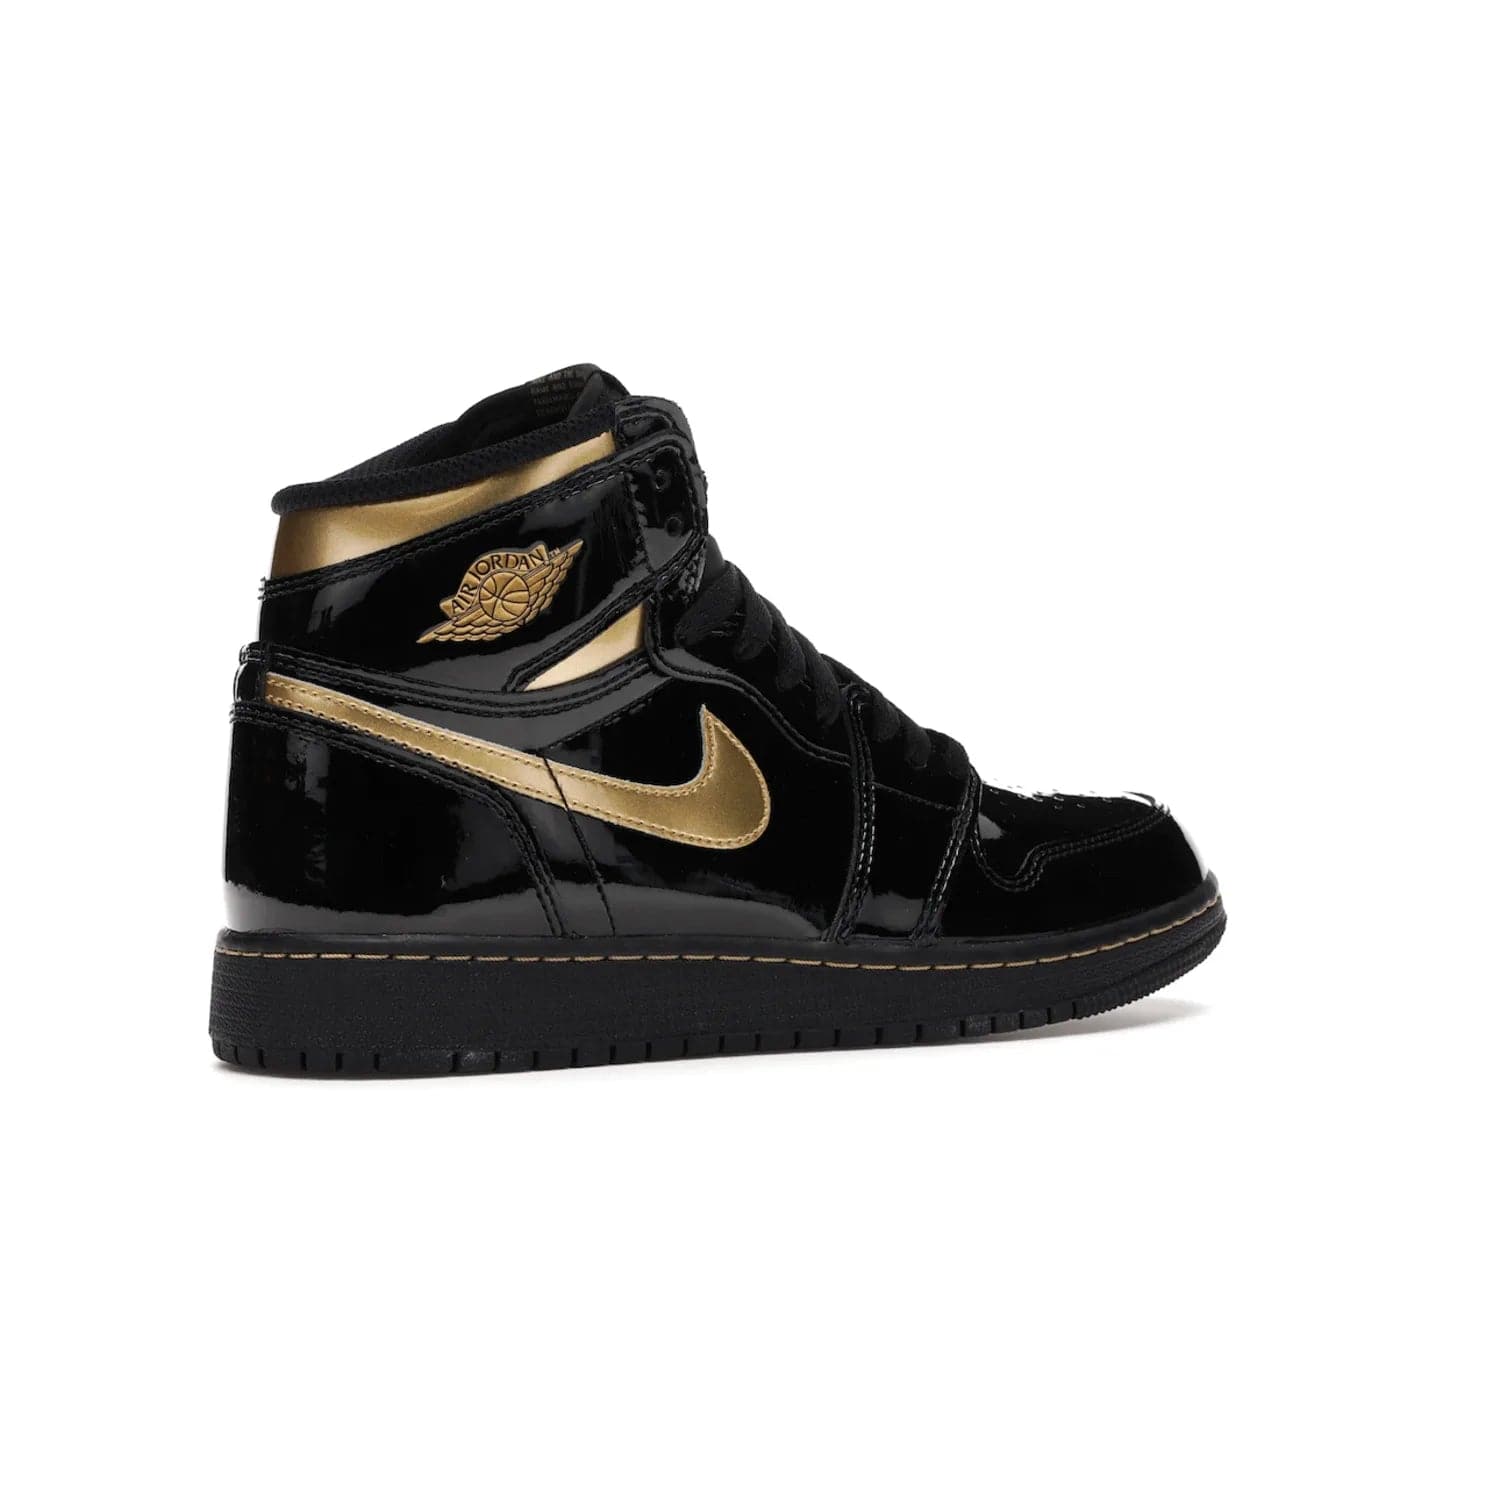 Jordan 1 Retro High Black Metallic Gold (2020) (GS) - Image 34 - Only at www.BallersClubKickz.com - Shop the Kids Air Jordan 1 Retro High in Black Metallic Gold for a stylish and comfortable sneaker kids can love. Featuring black and metallic gold patent leather uppers, metallic gold accents, and an Air sole unit for extra cushioning.